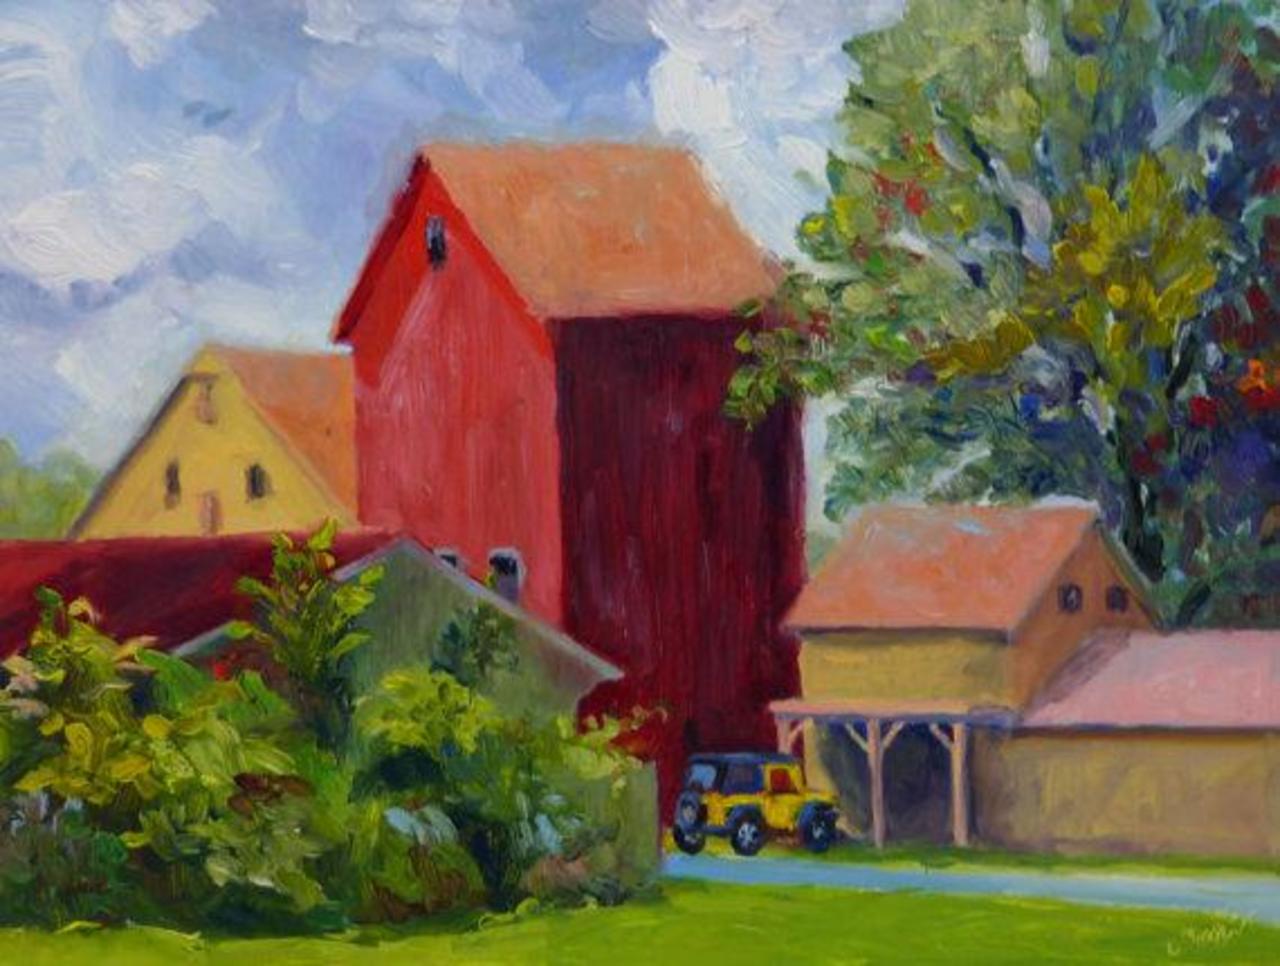 Original Landscape Painting Historic Mill Town Sto http://arnd.co/Zteeu  #bestofEtsy #art http://t.co/Ygh7I4OuEa